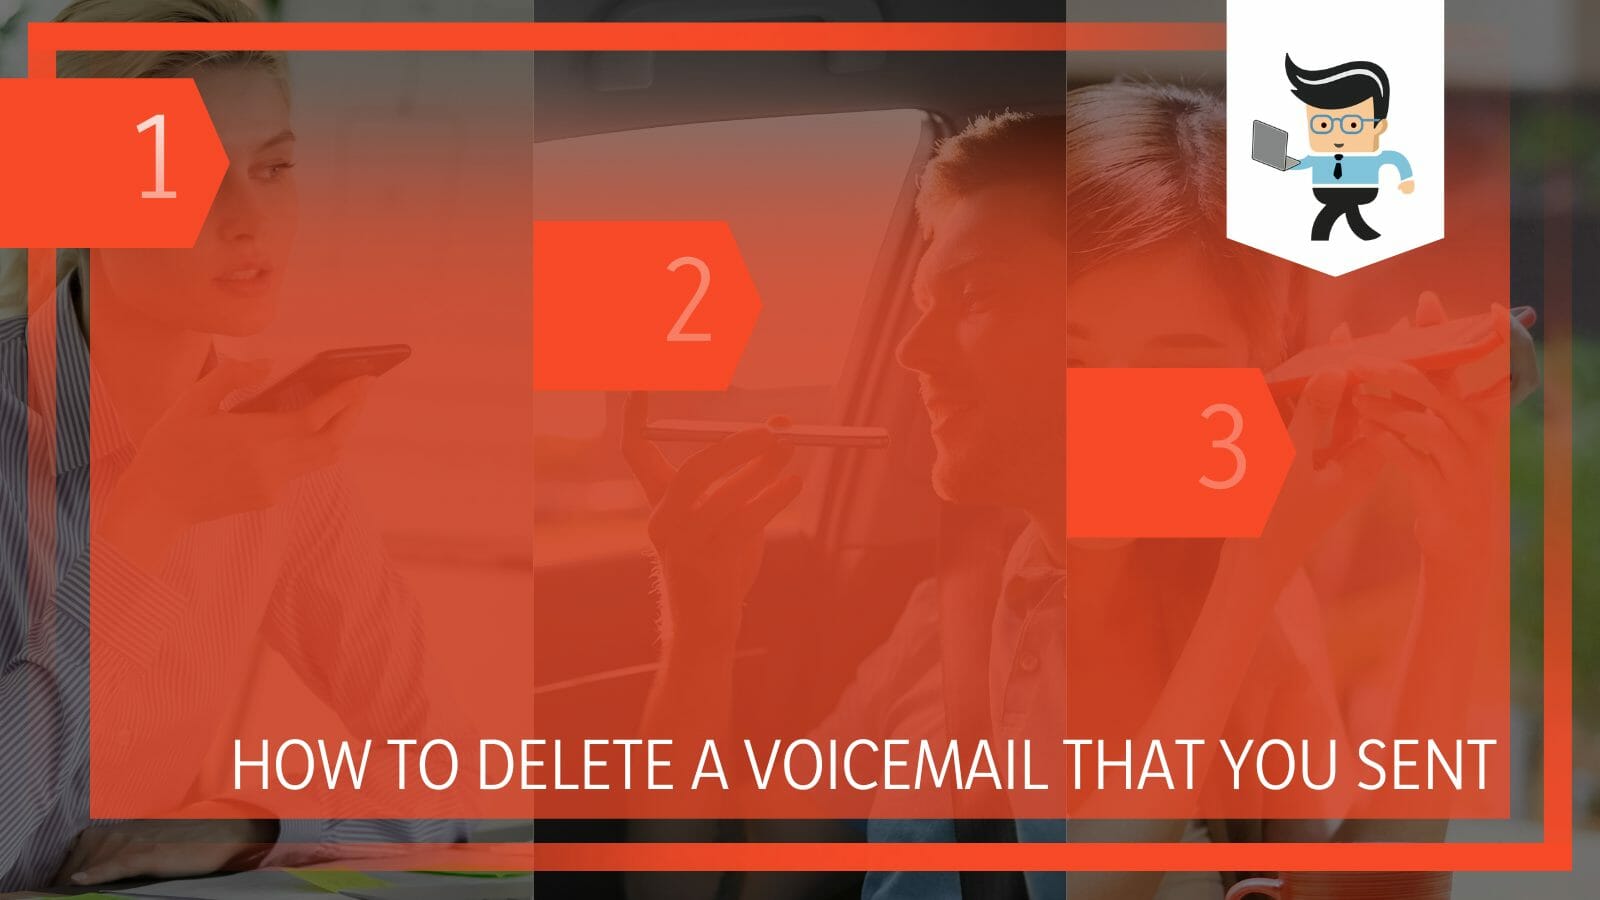 How To Delete a Voicemail That You Sent